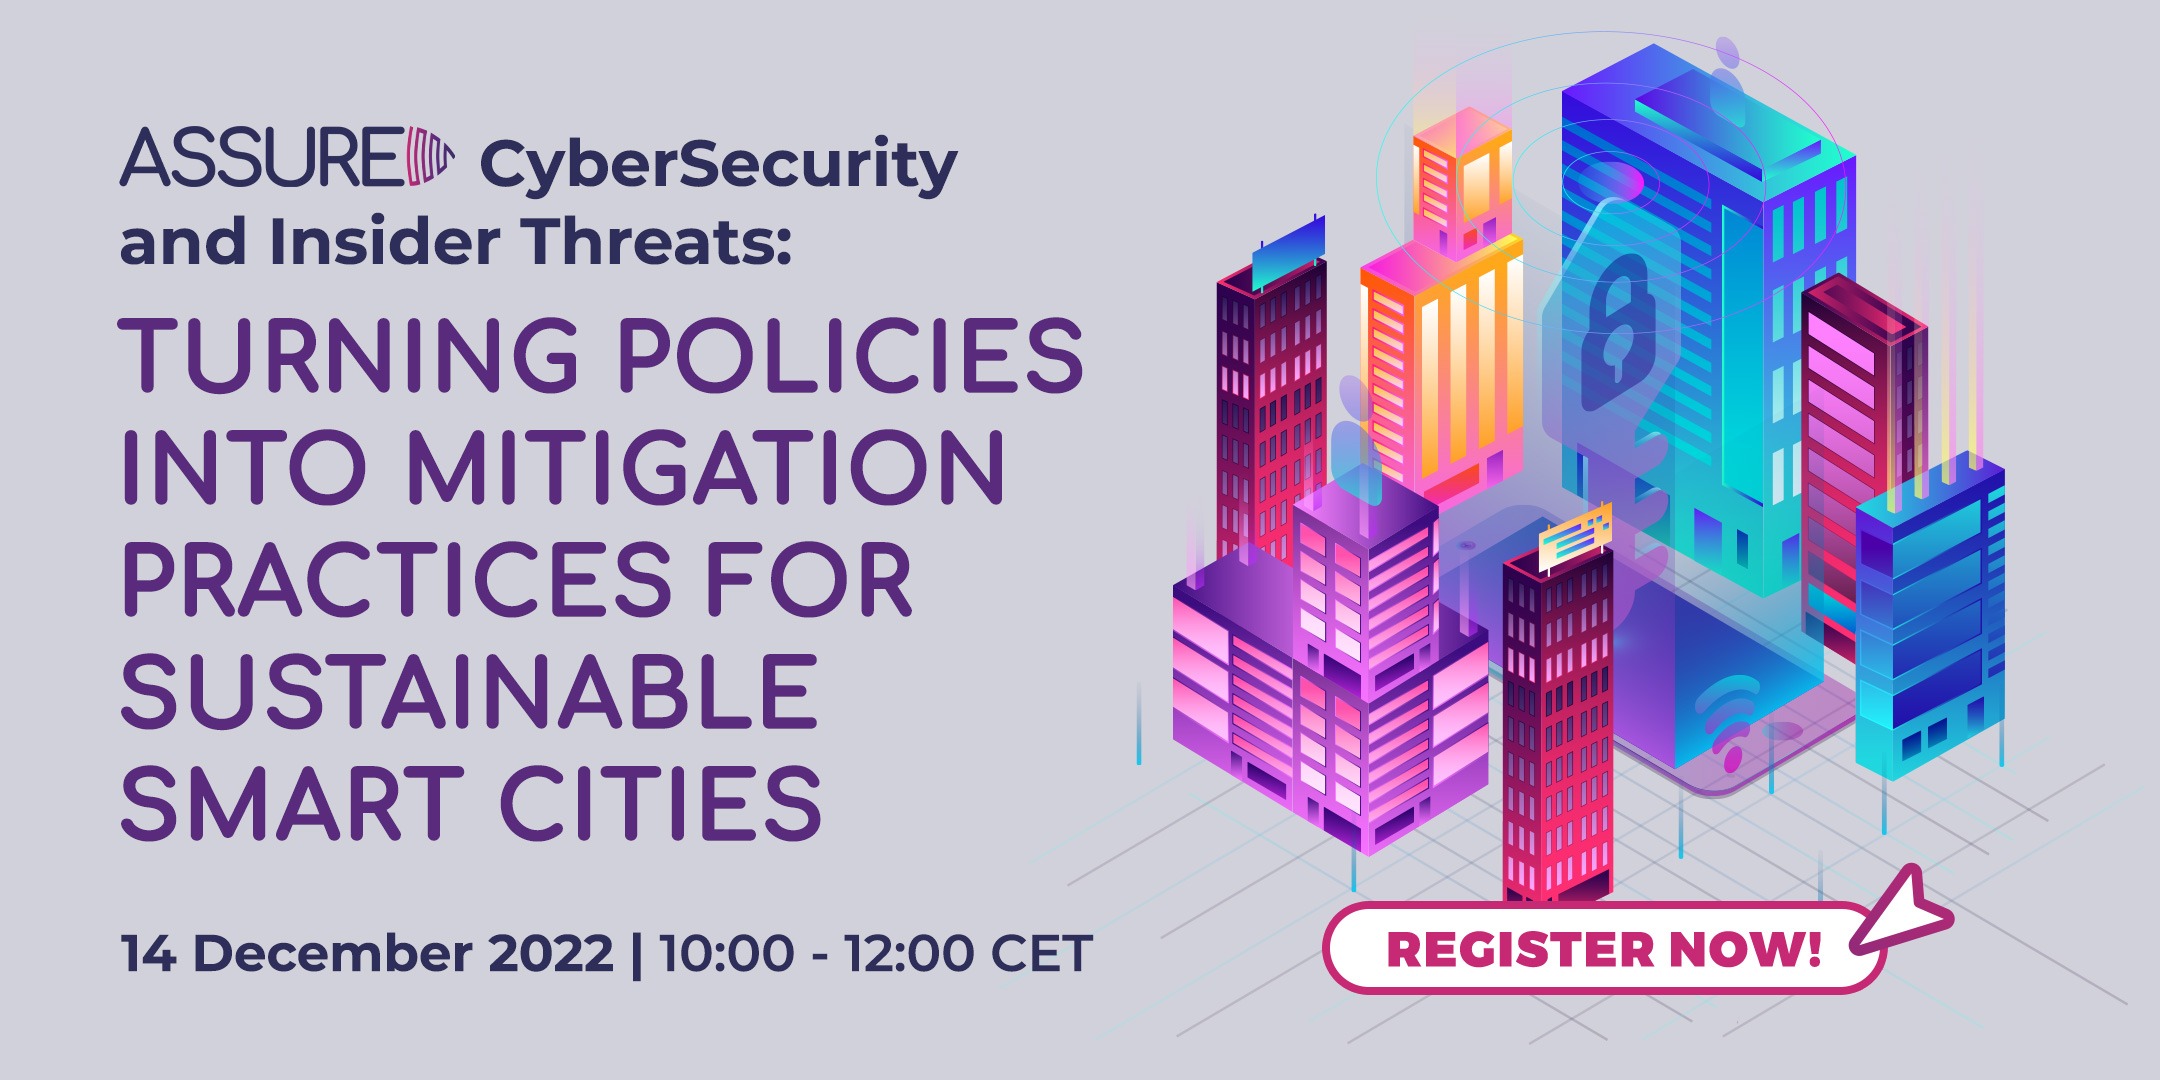 ASSURED CyberSecurity and Insider Threats: Turning Policies into Mitigation Practices for Sustainable Smart Cities